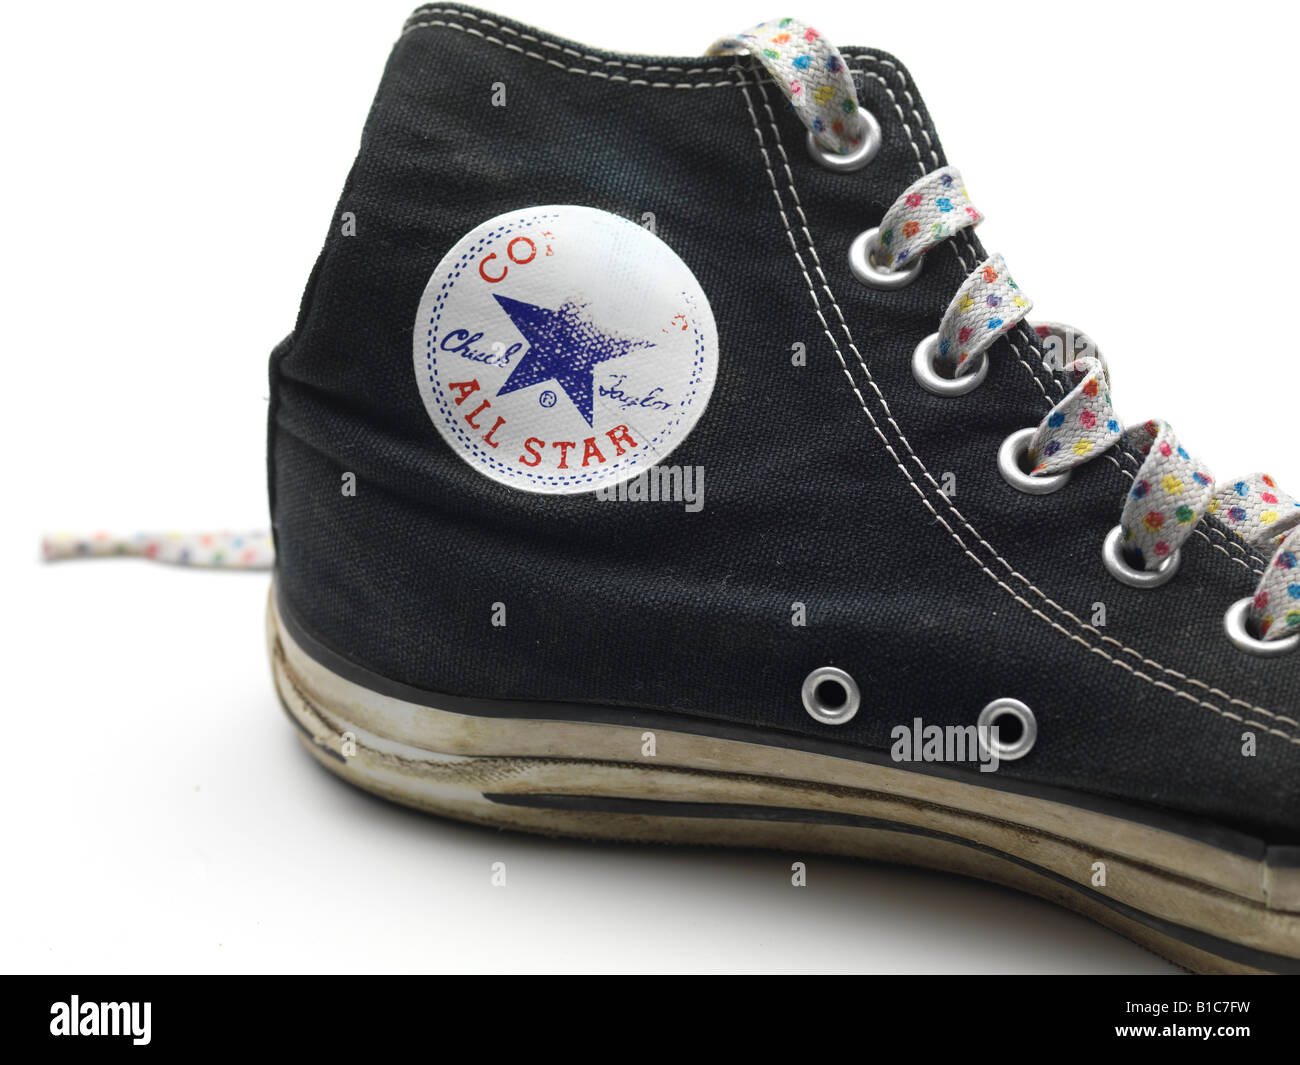 converse all star high latex back basketball dirty lace shoestring  personalized crest old ruined symbol frim trade name brand Stock Photo -  Alamy